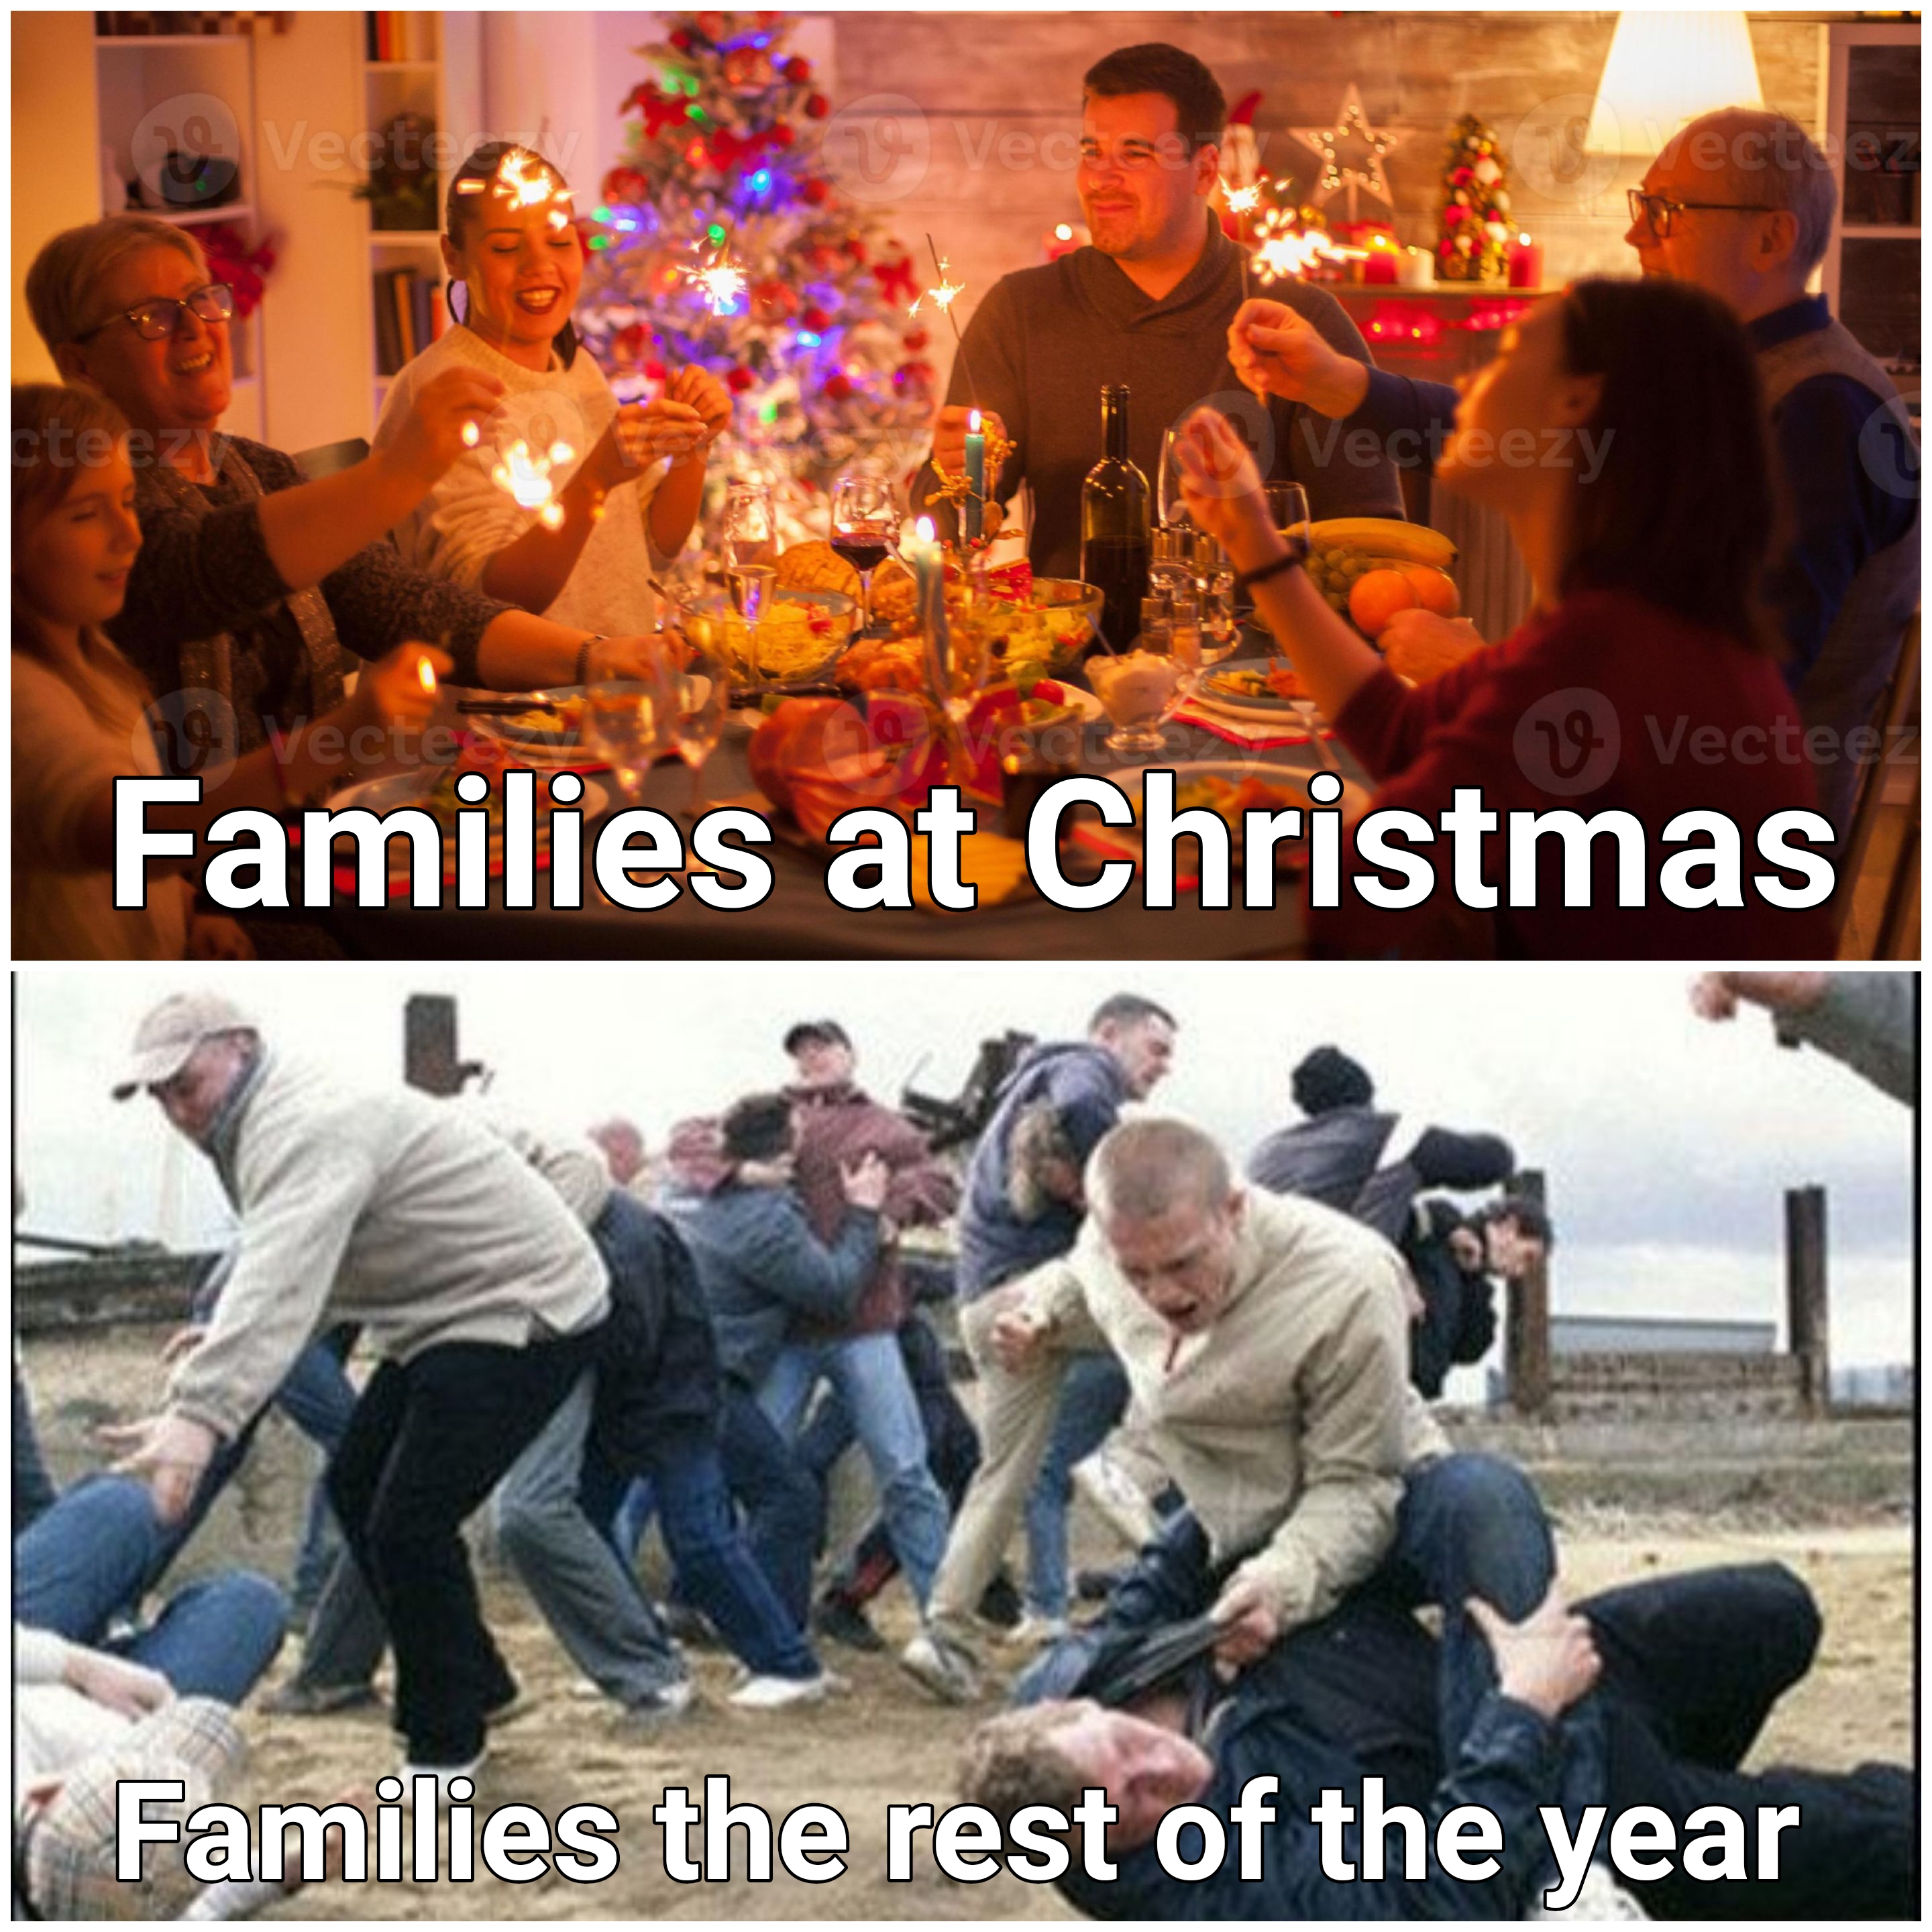 dank and savage memes - event - steez Veett Vecreezy vect 19 Vectees Families at Christmas Families the rest of the year